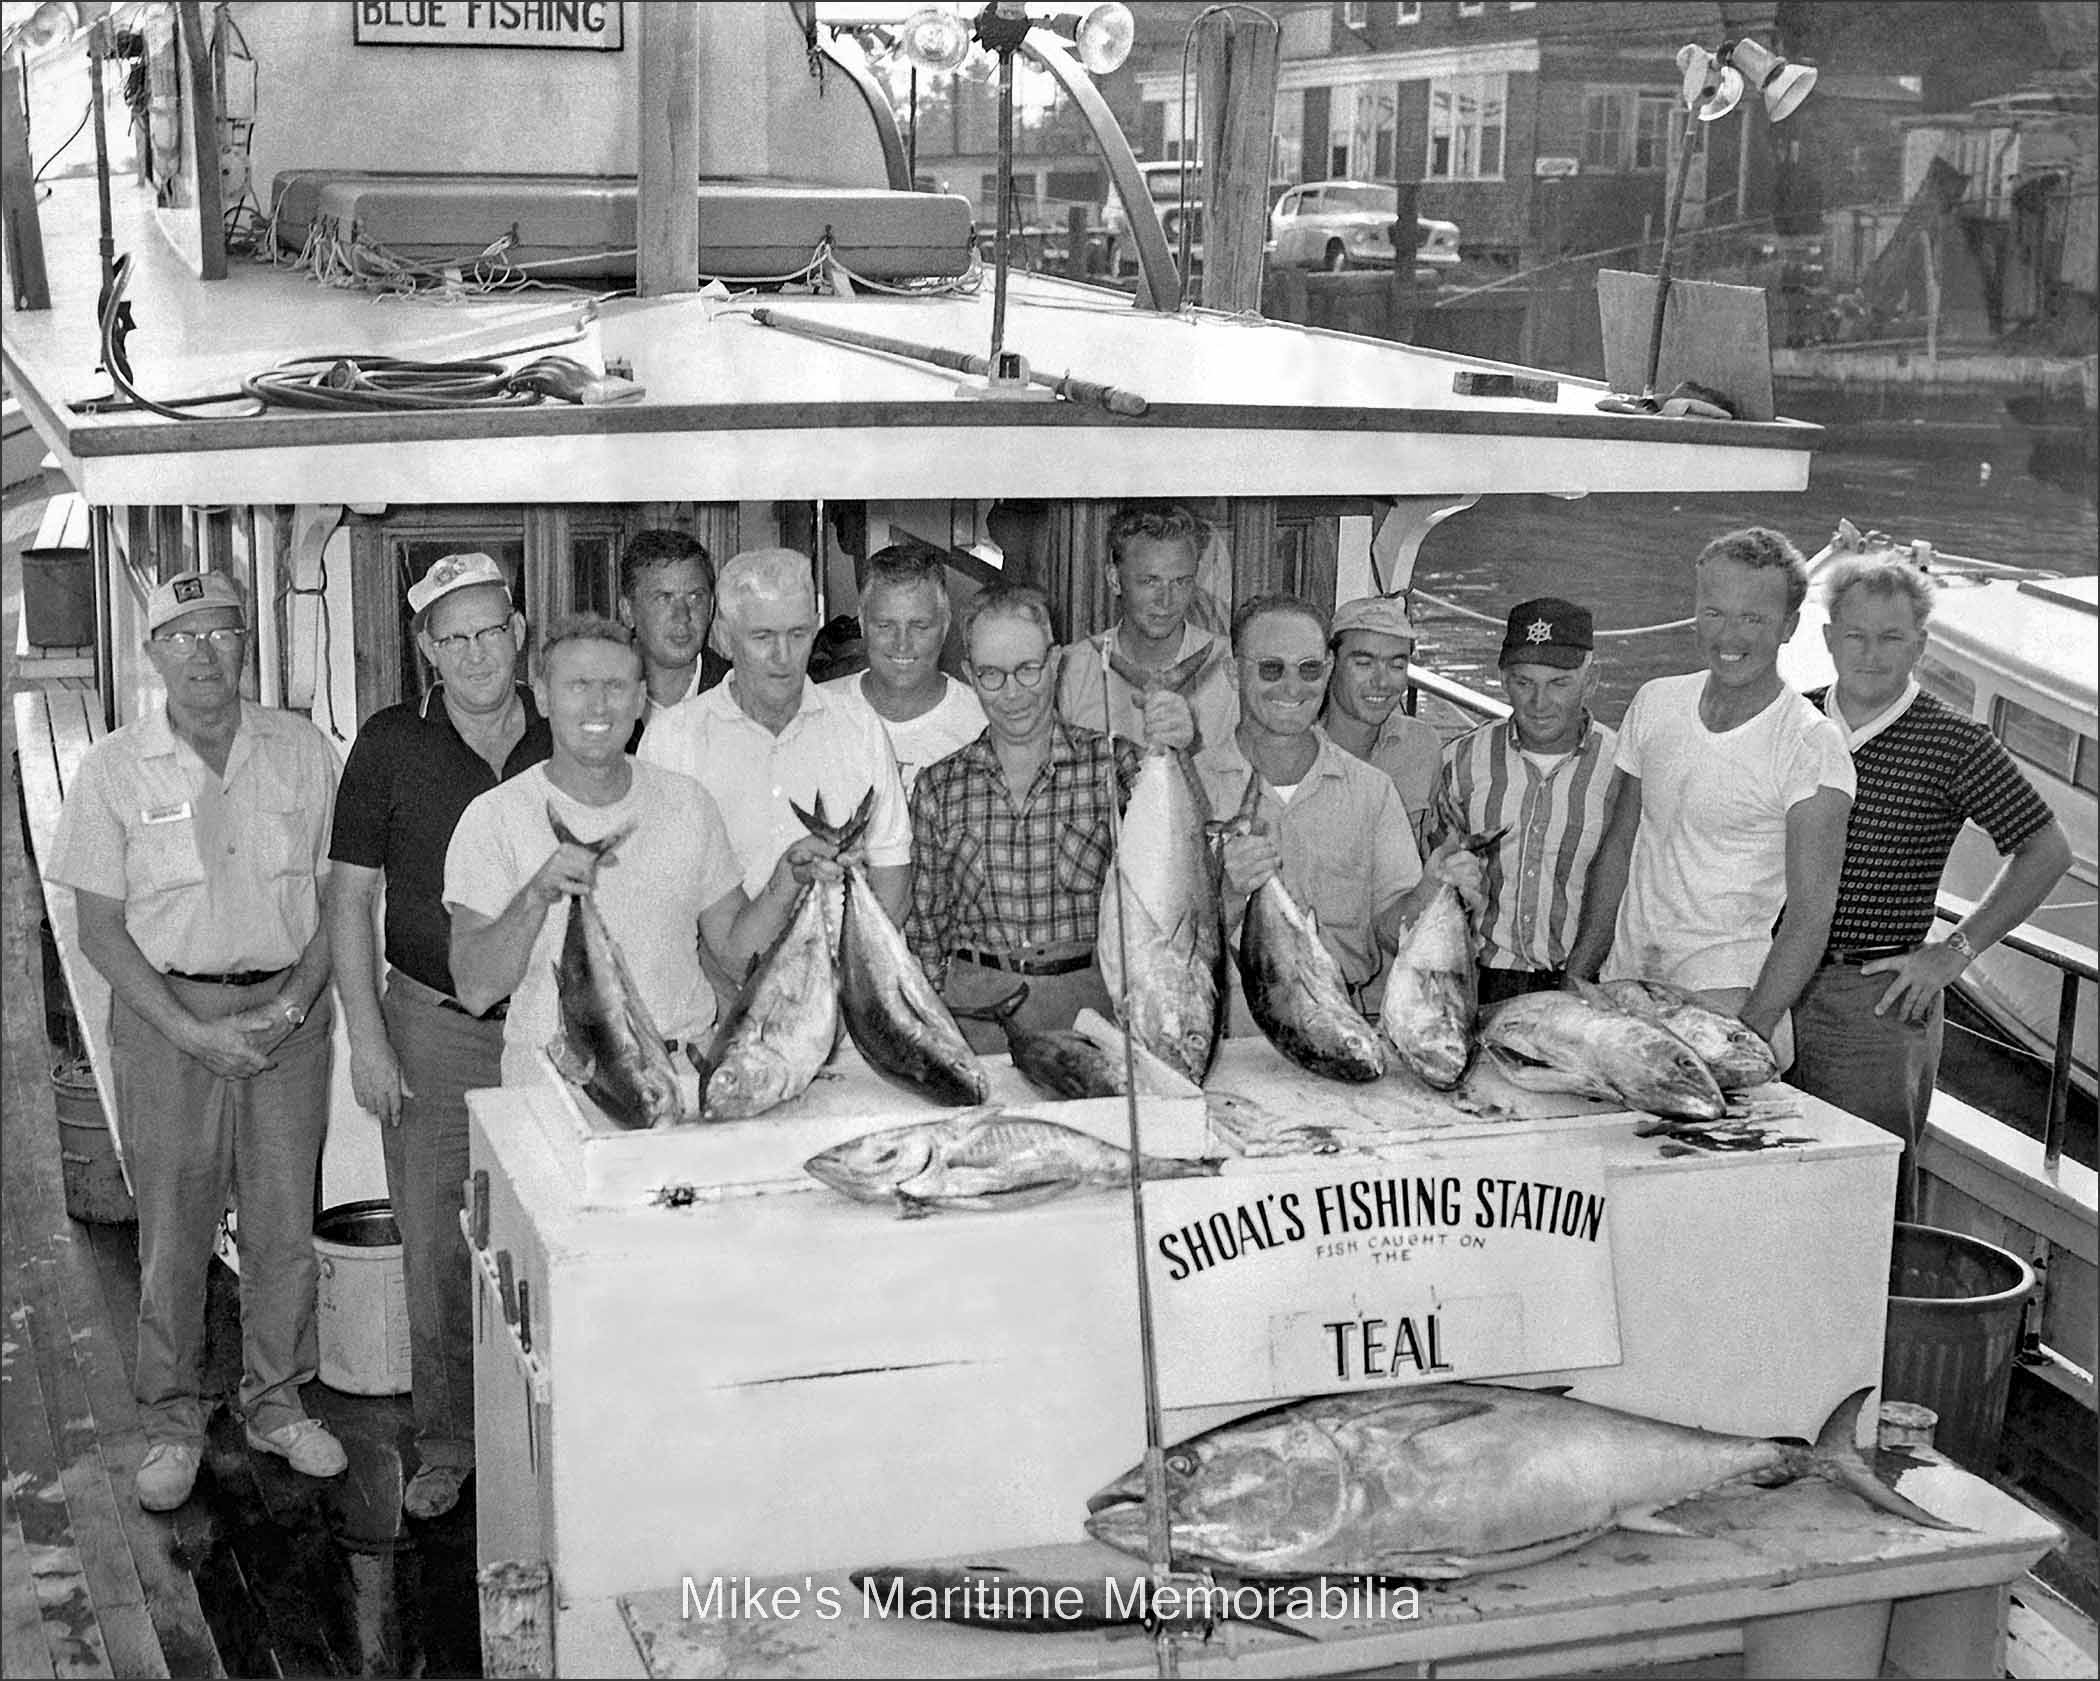 TEAL Tuna Trip, Staten Island, NY – 1966 The results of a 'Mud Hole' tuna fishing trip aboard the "TEAL" in 1966. At the left of the bait box and holding a couple of tuna, is Captain 'Freddie' Moore of the "TEAL". At the right of the bait box and wearing a white t-shirt, is "TEAL" First Mate Ken Ekberg. Wearing a striped shirt and baseball cap is a very young Captain Marty Haines Jr. of the "MAJESTIC" and "SEA PIGEON" from Perth Amboy, NJ. The photo is courtesy of Ken Ekberg.